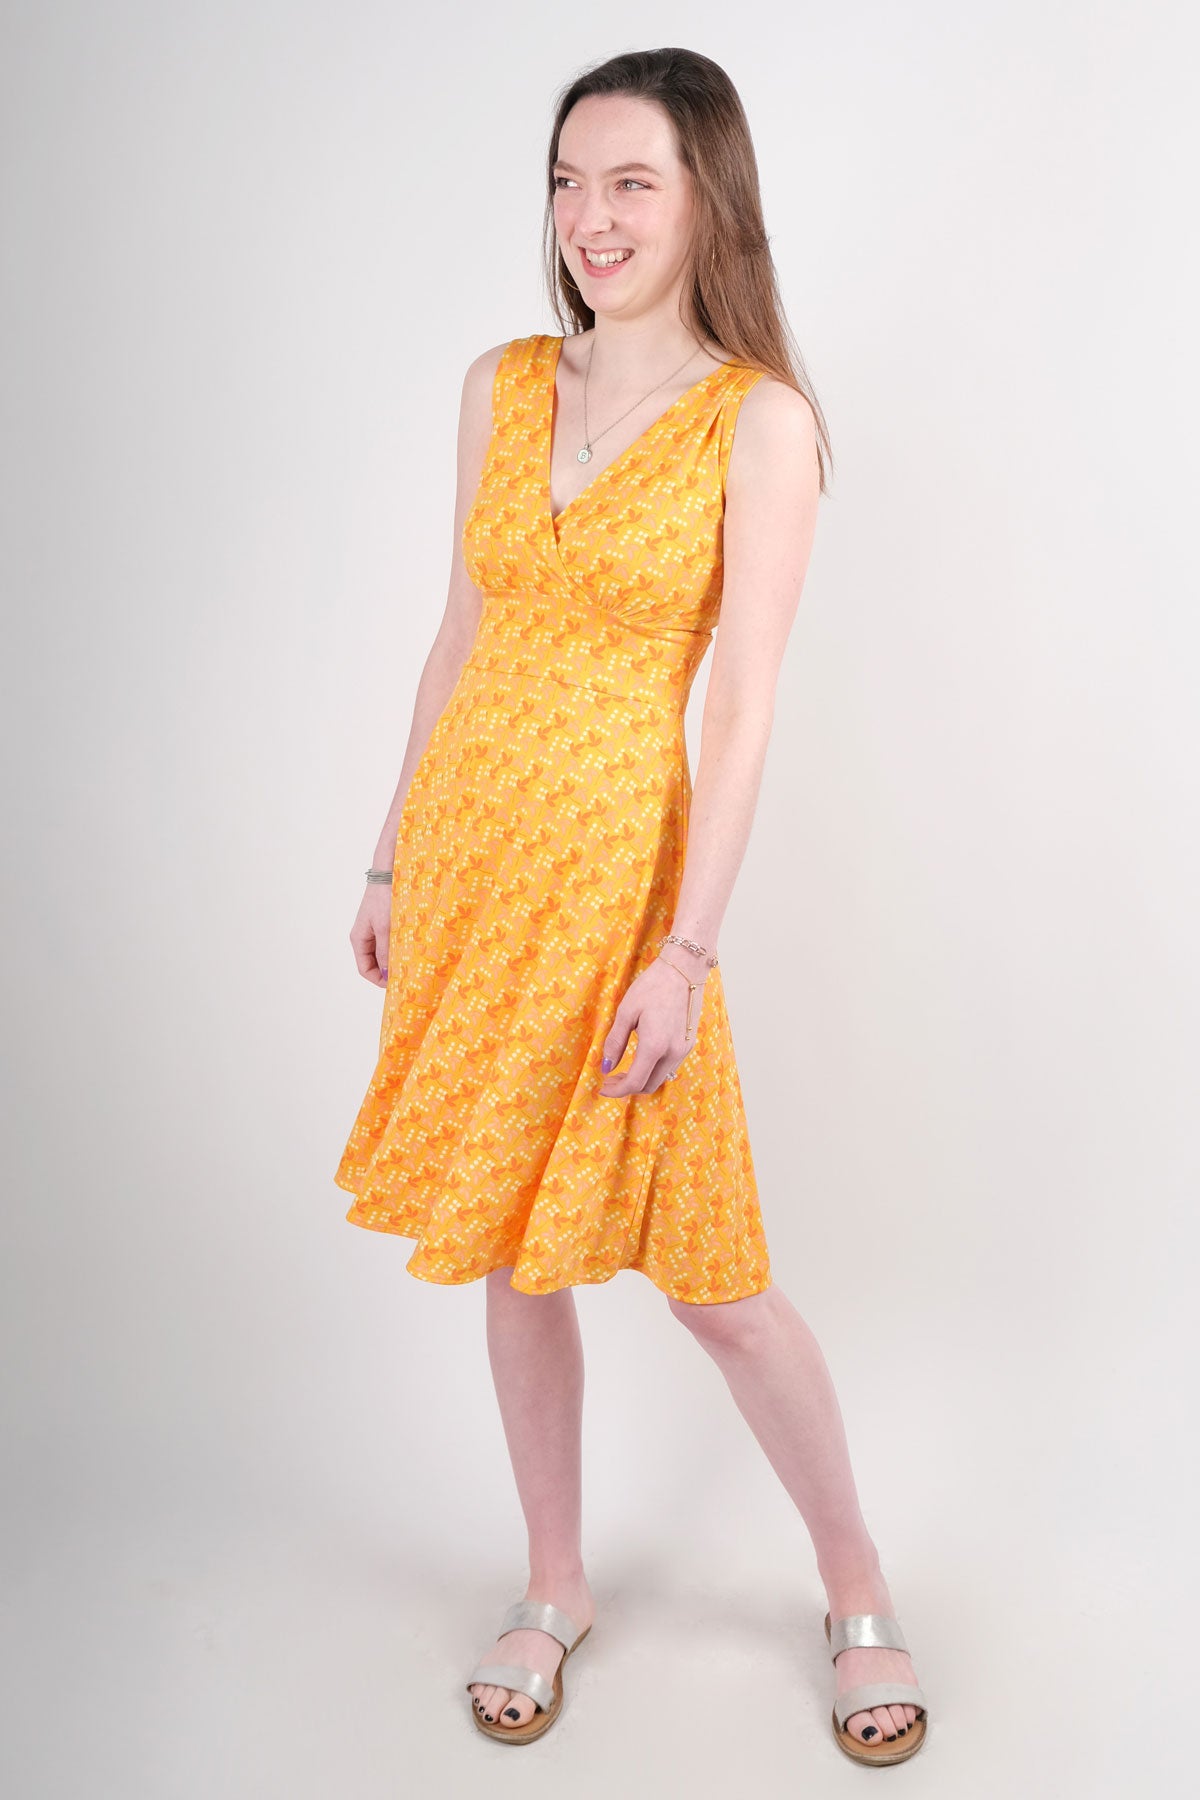 Load image into Gallery viewer, Audrey Dress - Orange You Beautiful FINAL SALE
